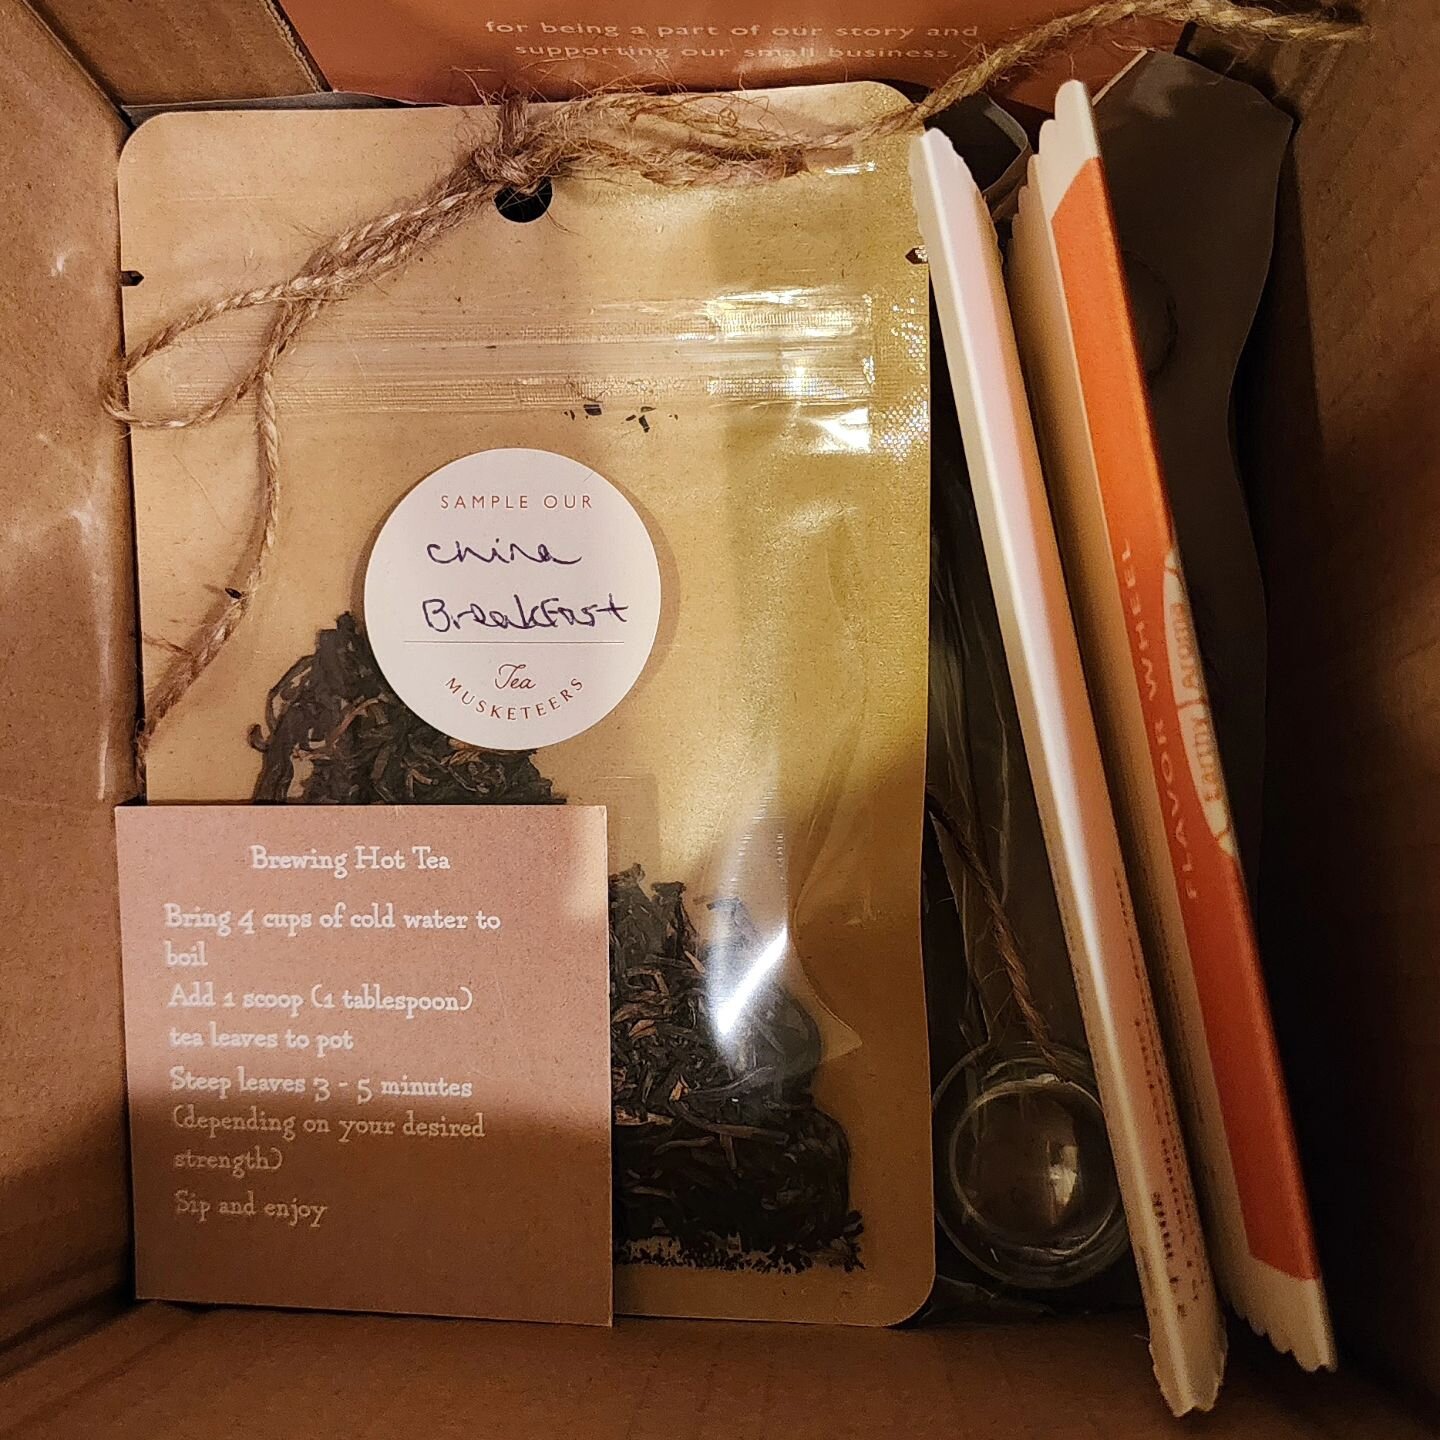 Our spring seasonal box is available until the end of April. It may be small, but it mighty!! It is a great way to sample our teas or gift to someone wanting to try tea. 
What does this box contain:
-Three tea samples (each make 1 pot of tea)
-One pe